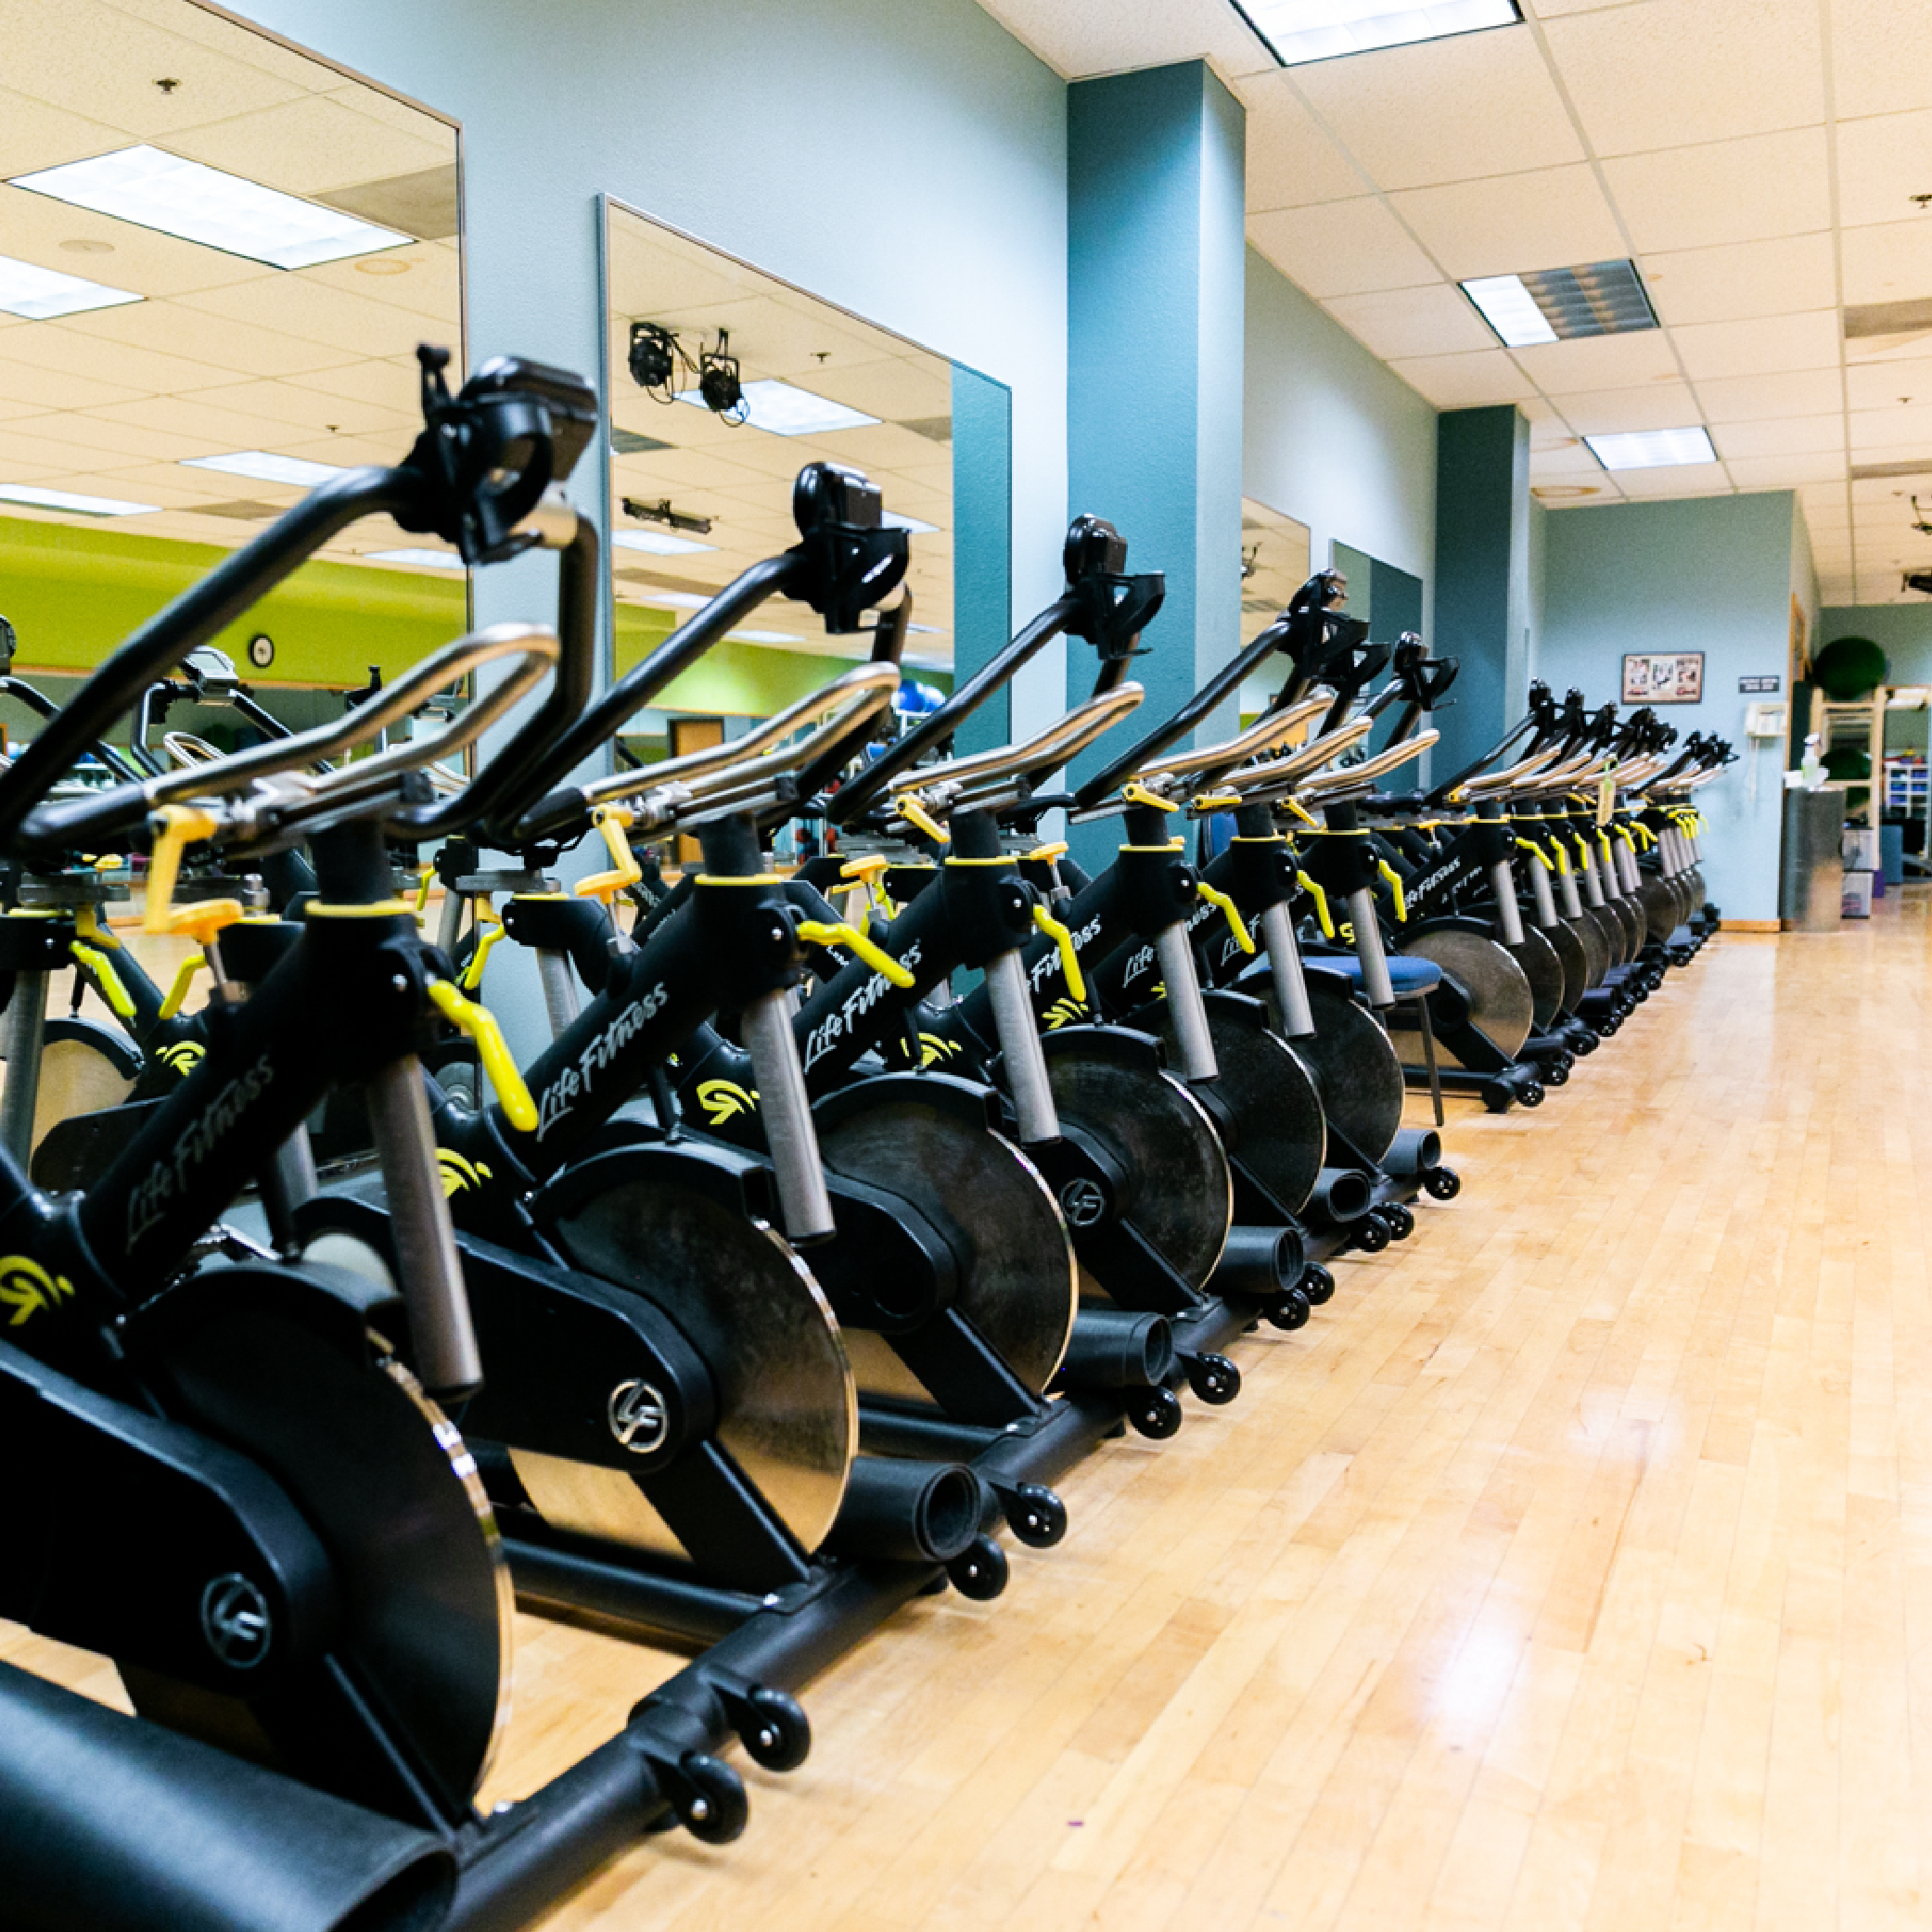 A row of exercise bikes stationed in our multipurpose room, ready for the next group fitness class.